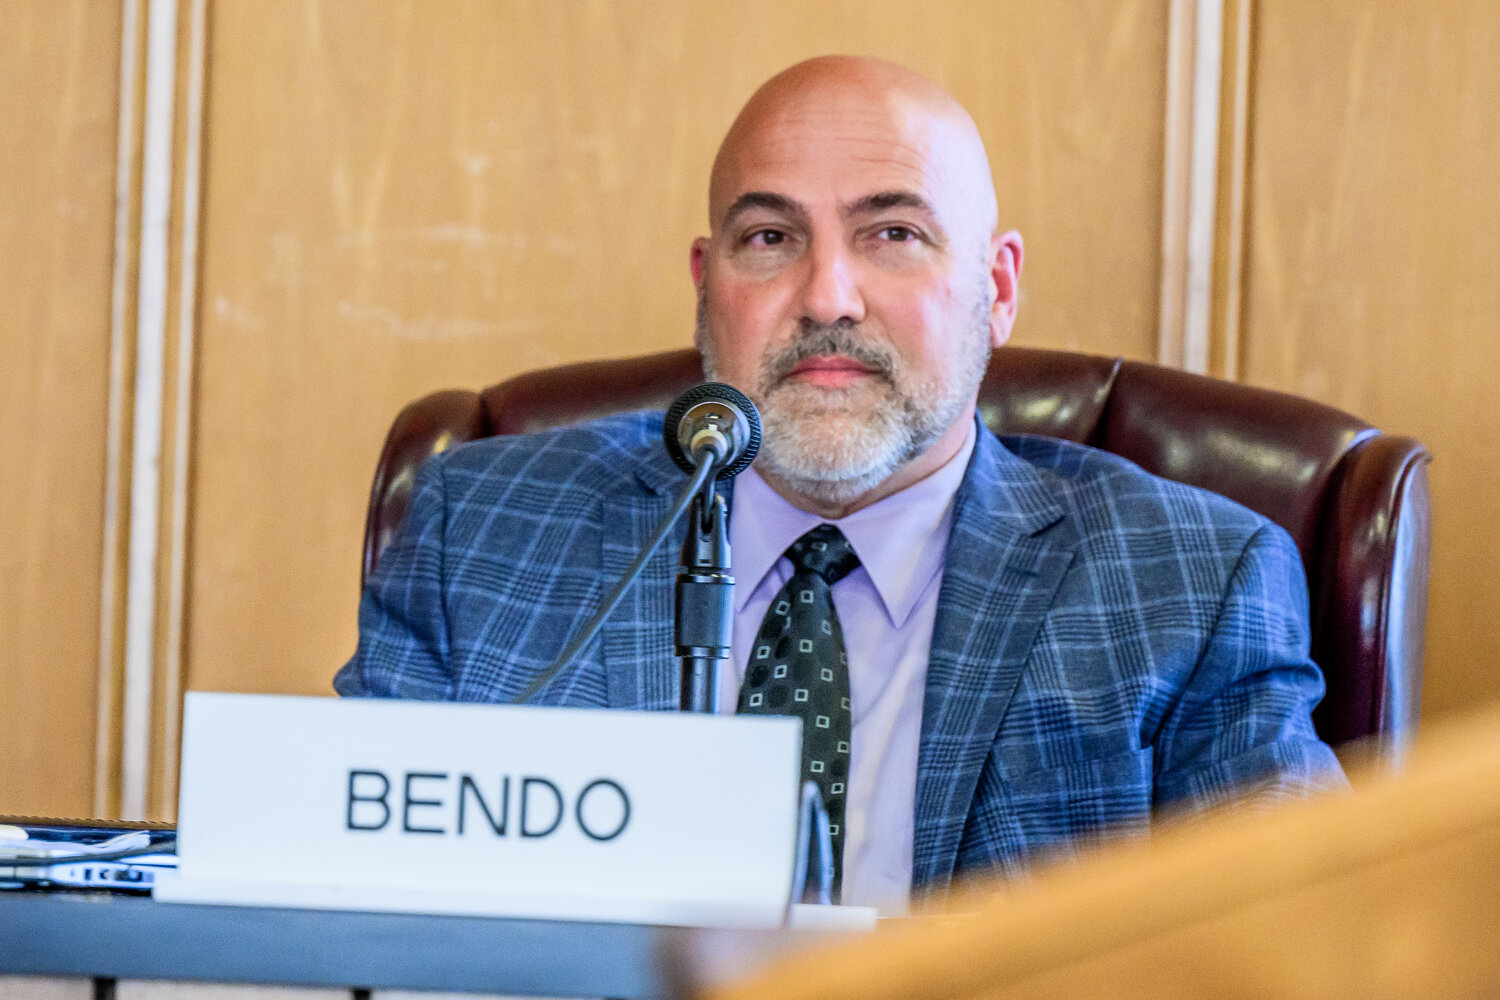 City Council President John Bendo called out Equinor at Tuesday’s council meeting, saying it is doing an “abysmal job” of informing the public.